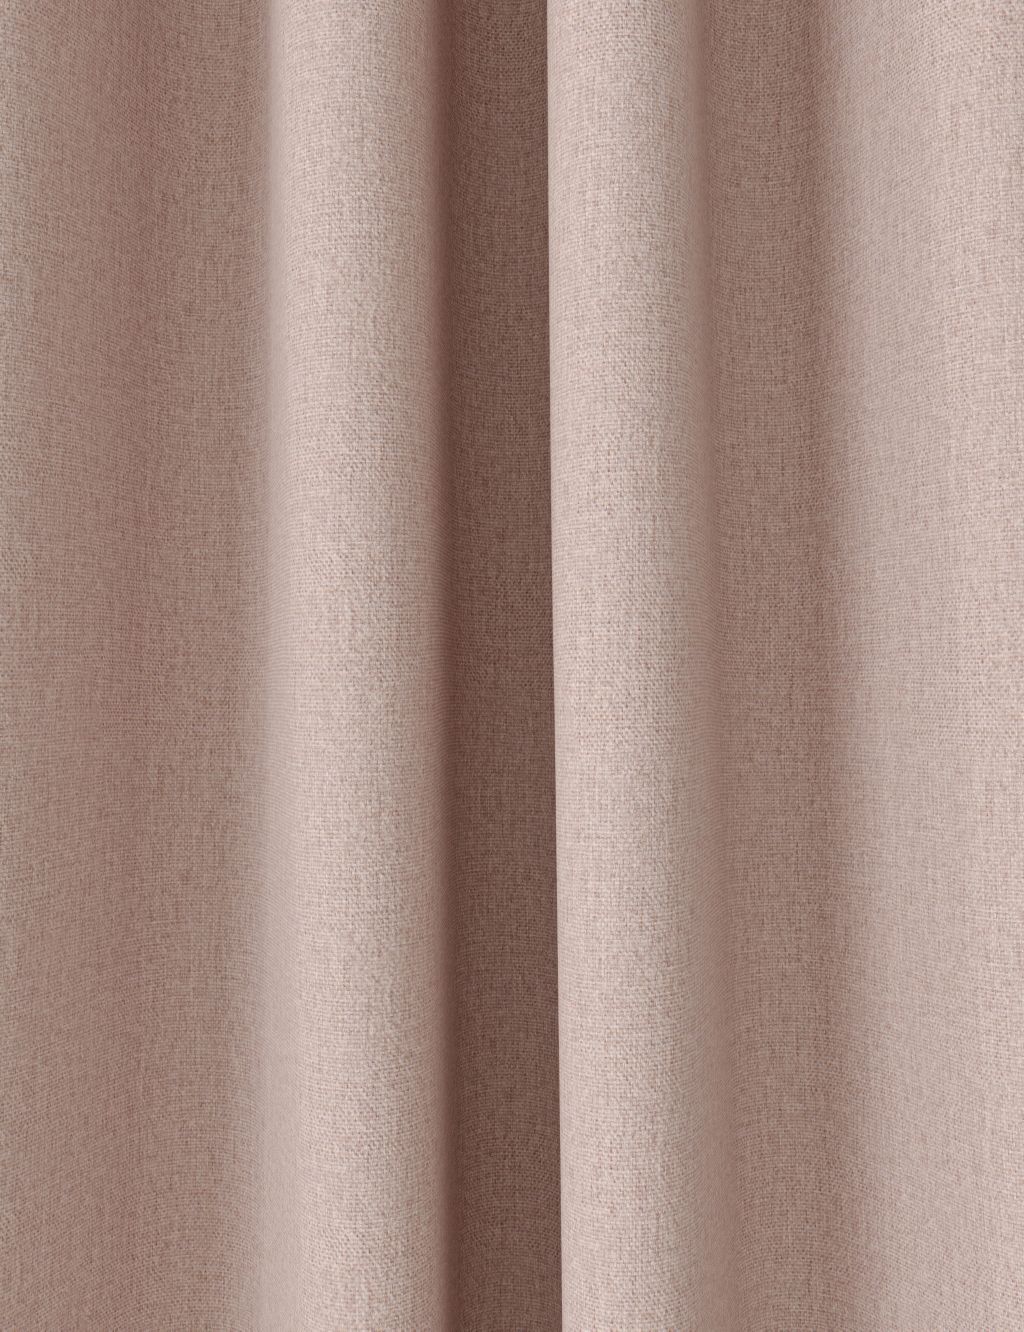 Brushed Pencil Pleat Blackout Ultra Temperature Smart Curtains